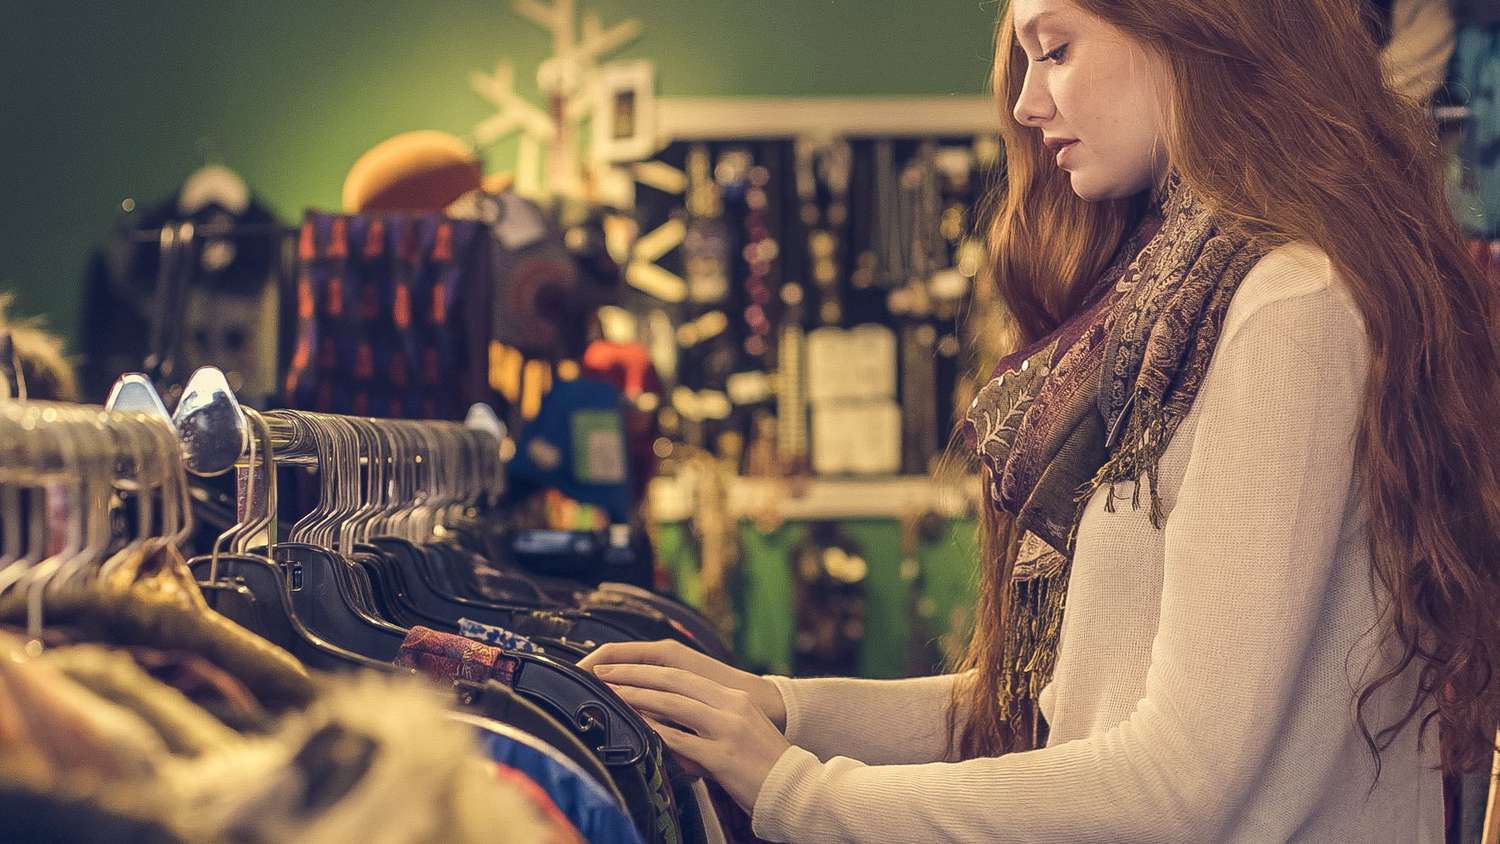 half-of-american-women-experience-anxiety-while-shopping-for-clothes-survey-finds